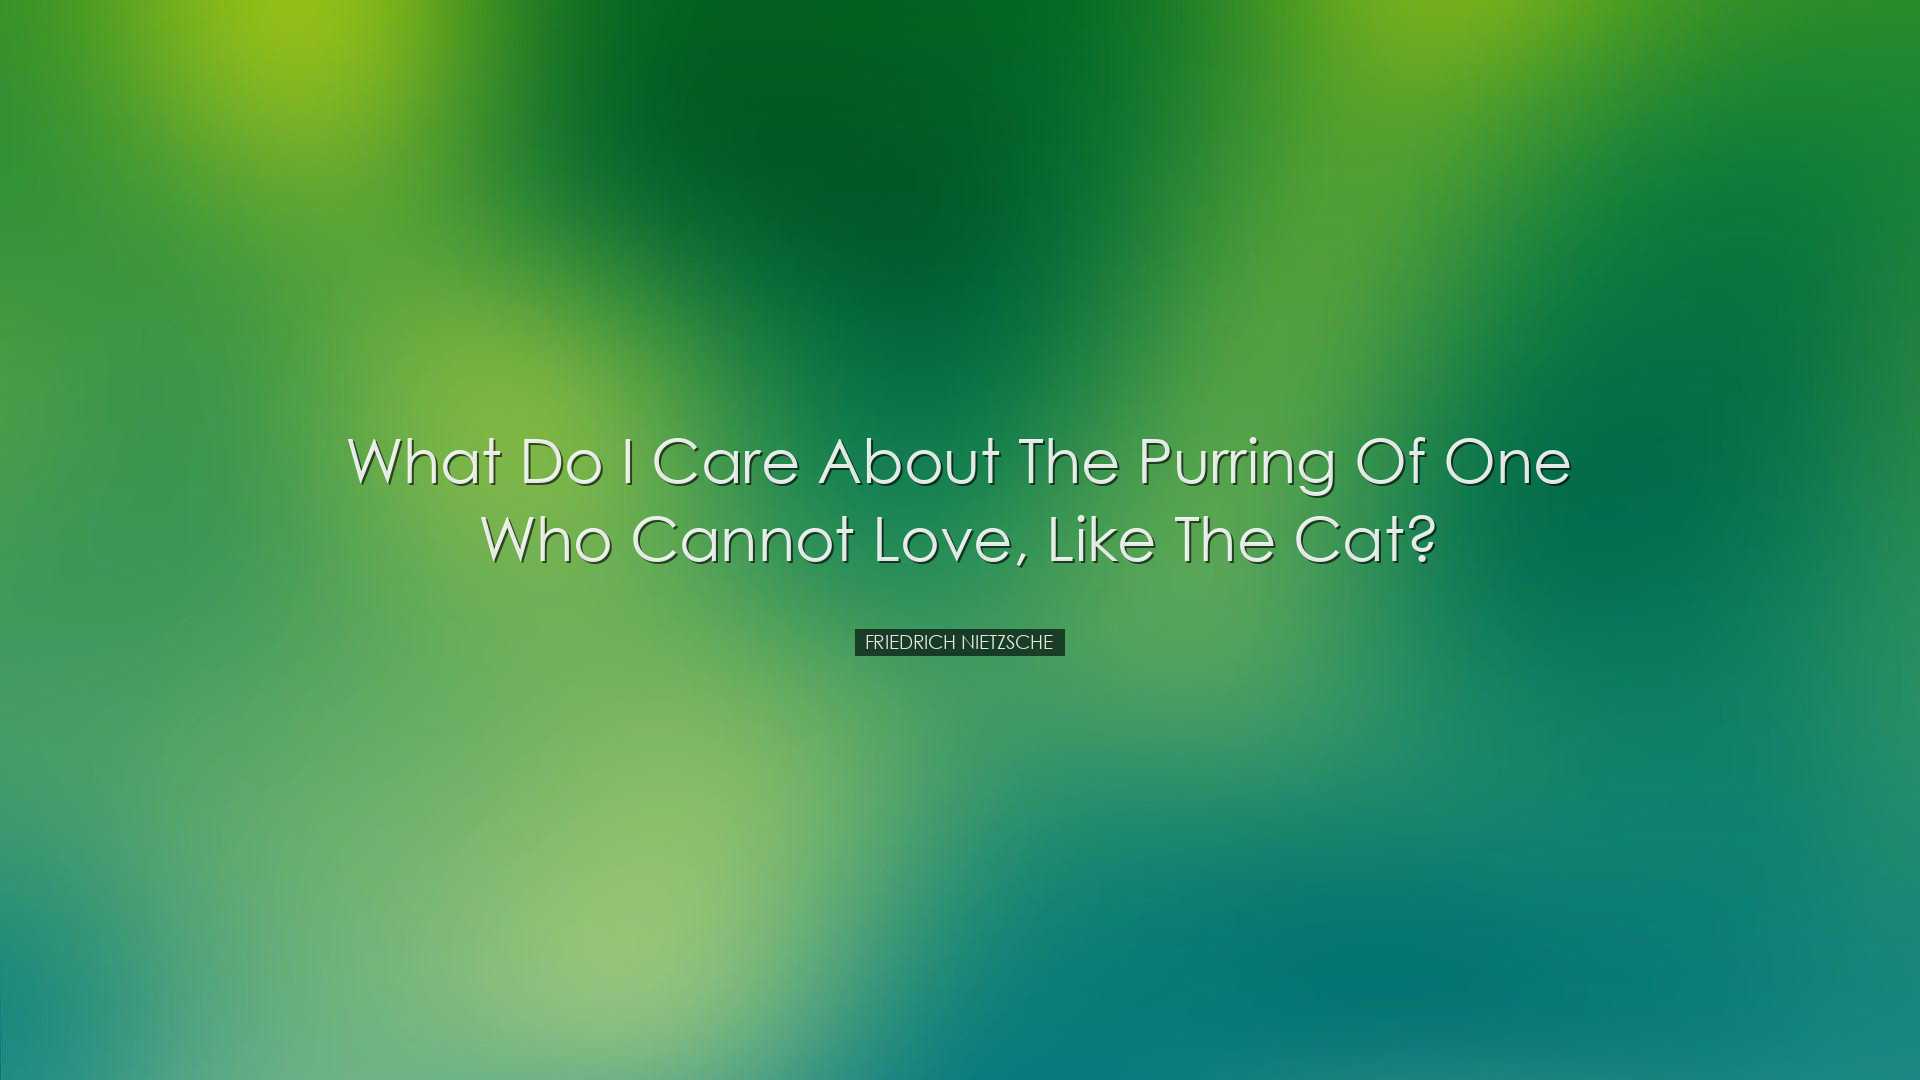 What do I care about the purring of one who cannot love, like the